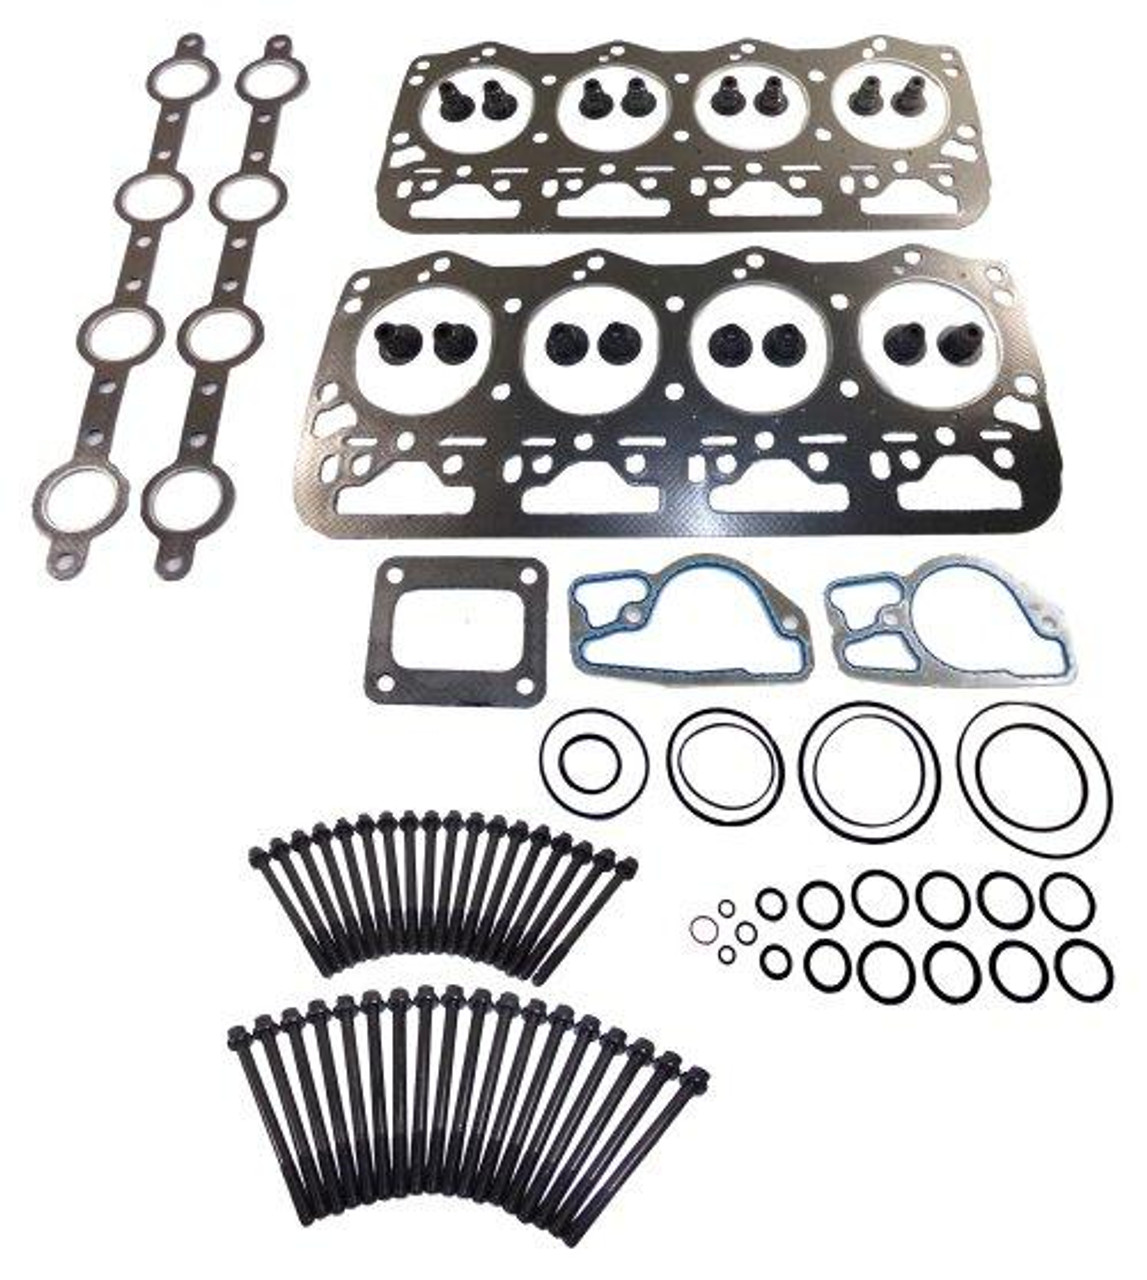 Head Gasket Set with Head Bolt Kit - 1996 Ford F-350 7.3L Engine Parts # HGB4200ZE53